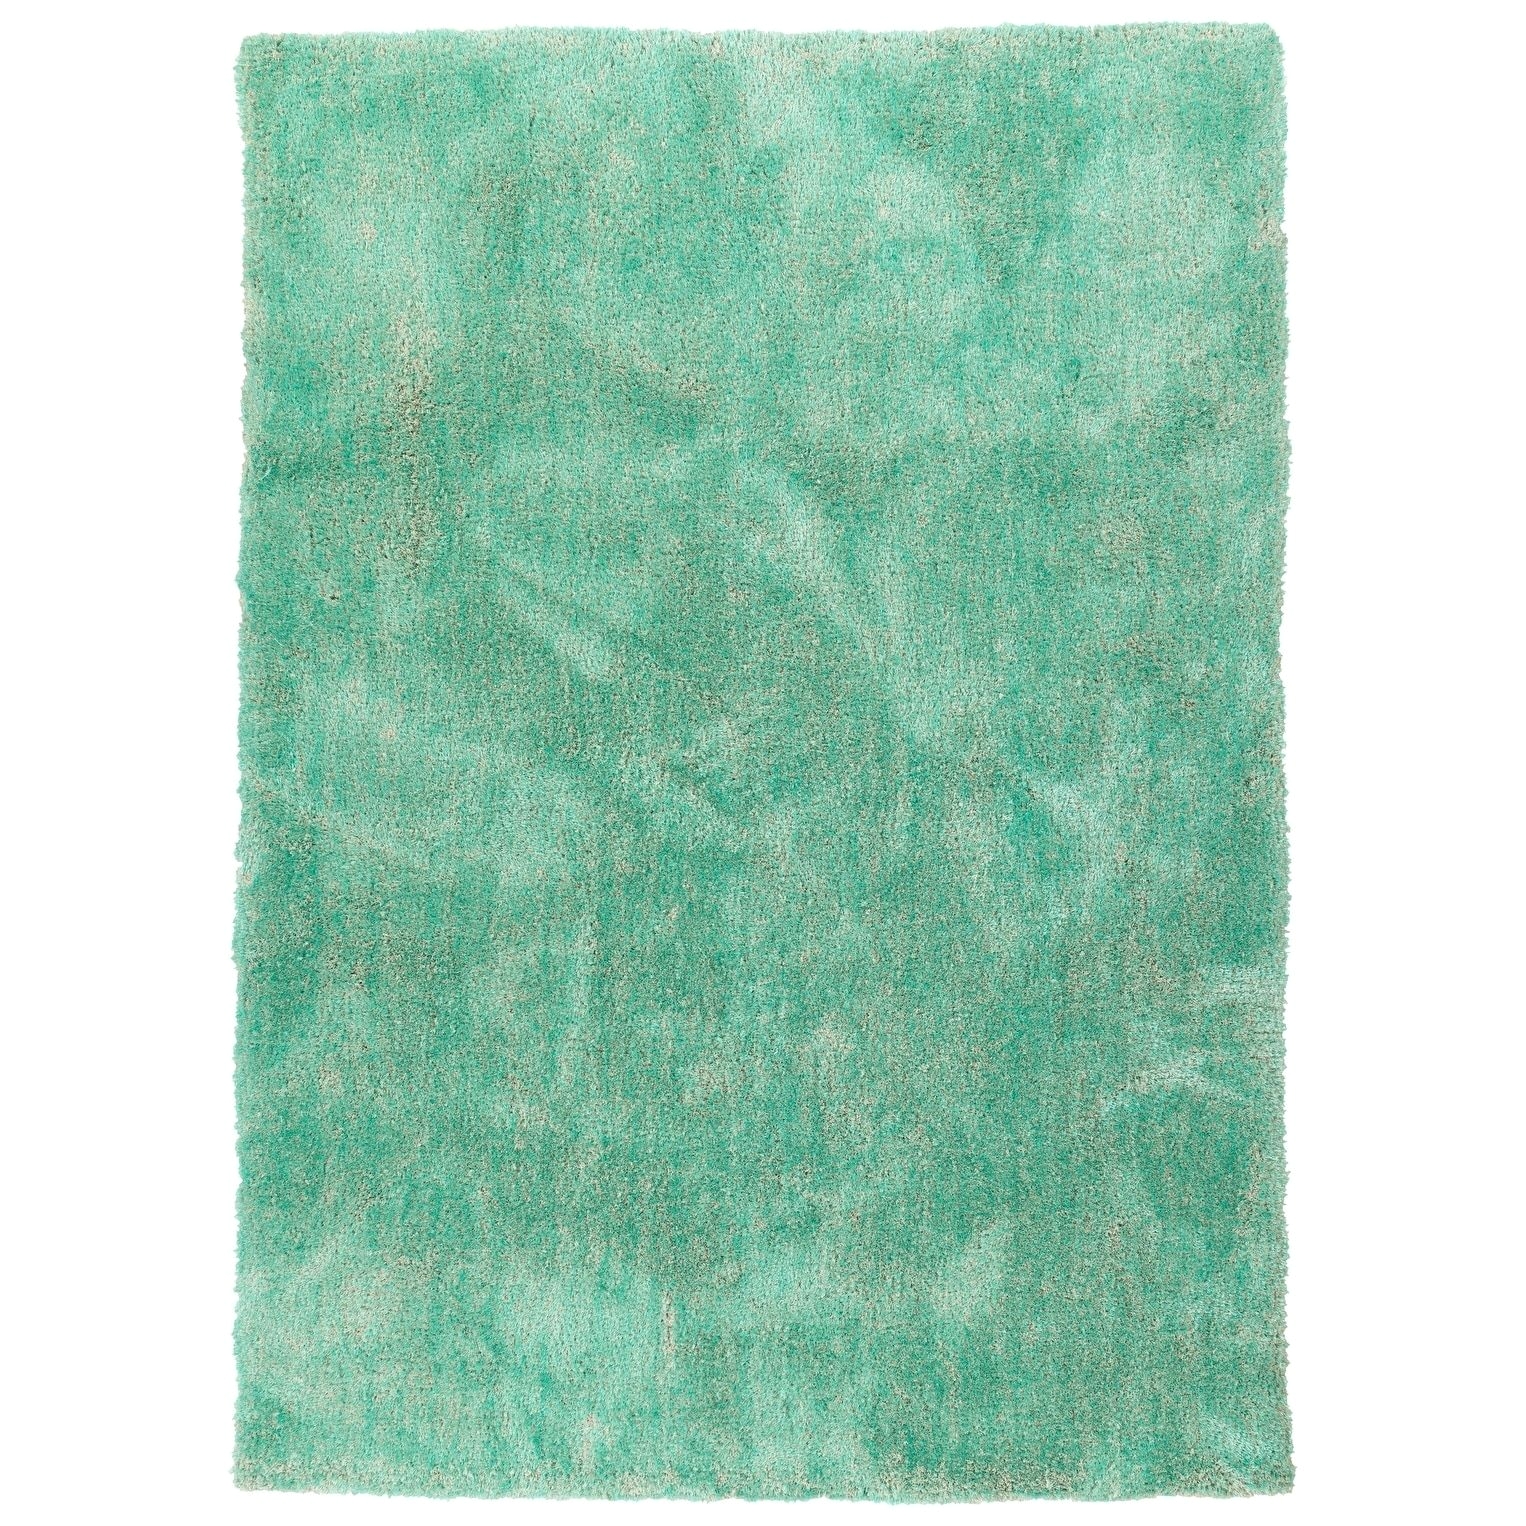 Teal Blue Furry Rug Bombay Home Silky Turquoise Hand Tufted Shag Rug 9 X 12 Blue